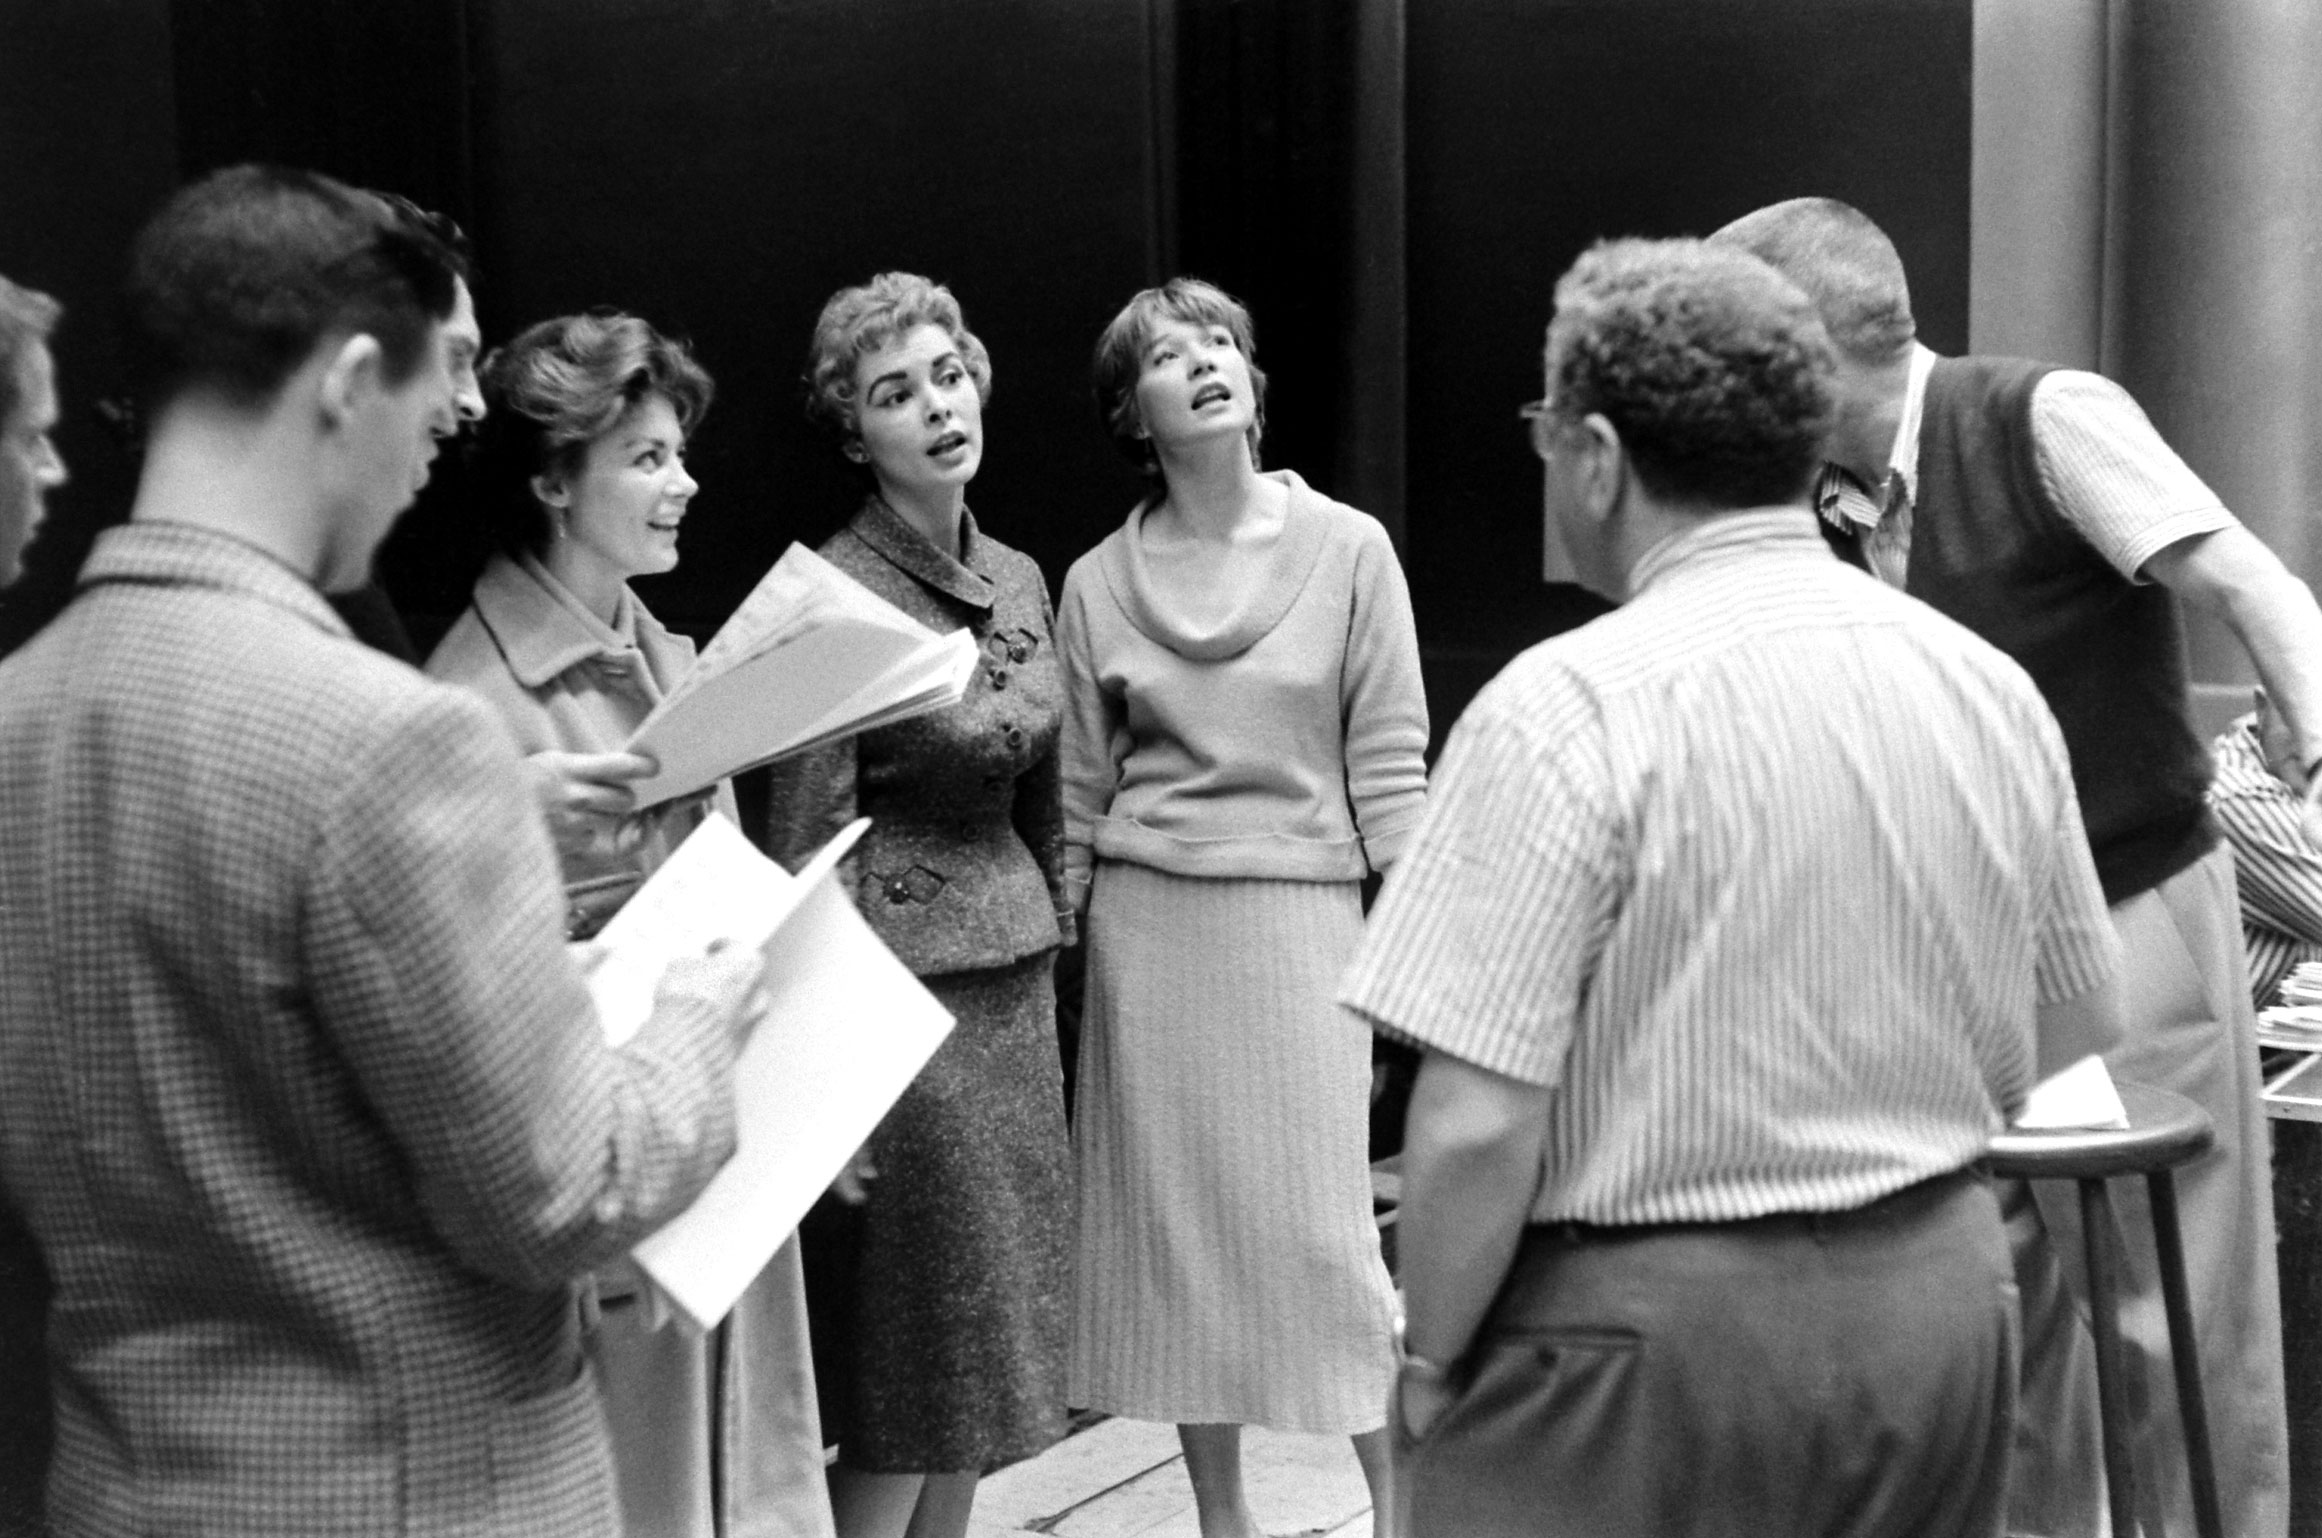 Inside Los Angeles' RKO Pantages theater, home of the Academy Awards from 1949 through 1959, Janet Leigh and Shirley MacLaine practice a tune.